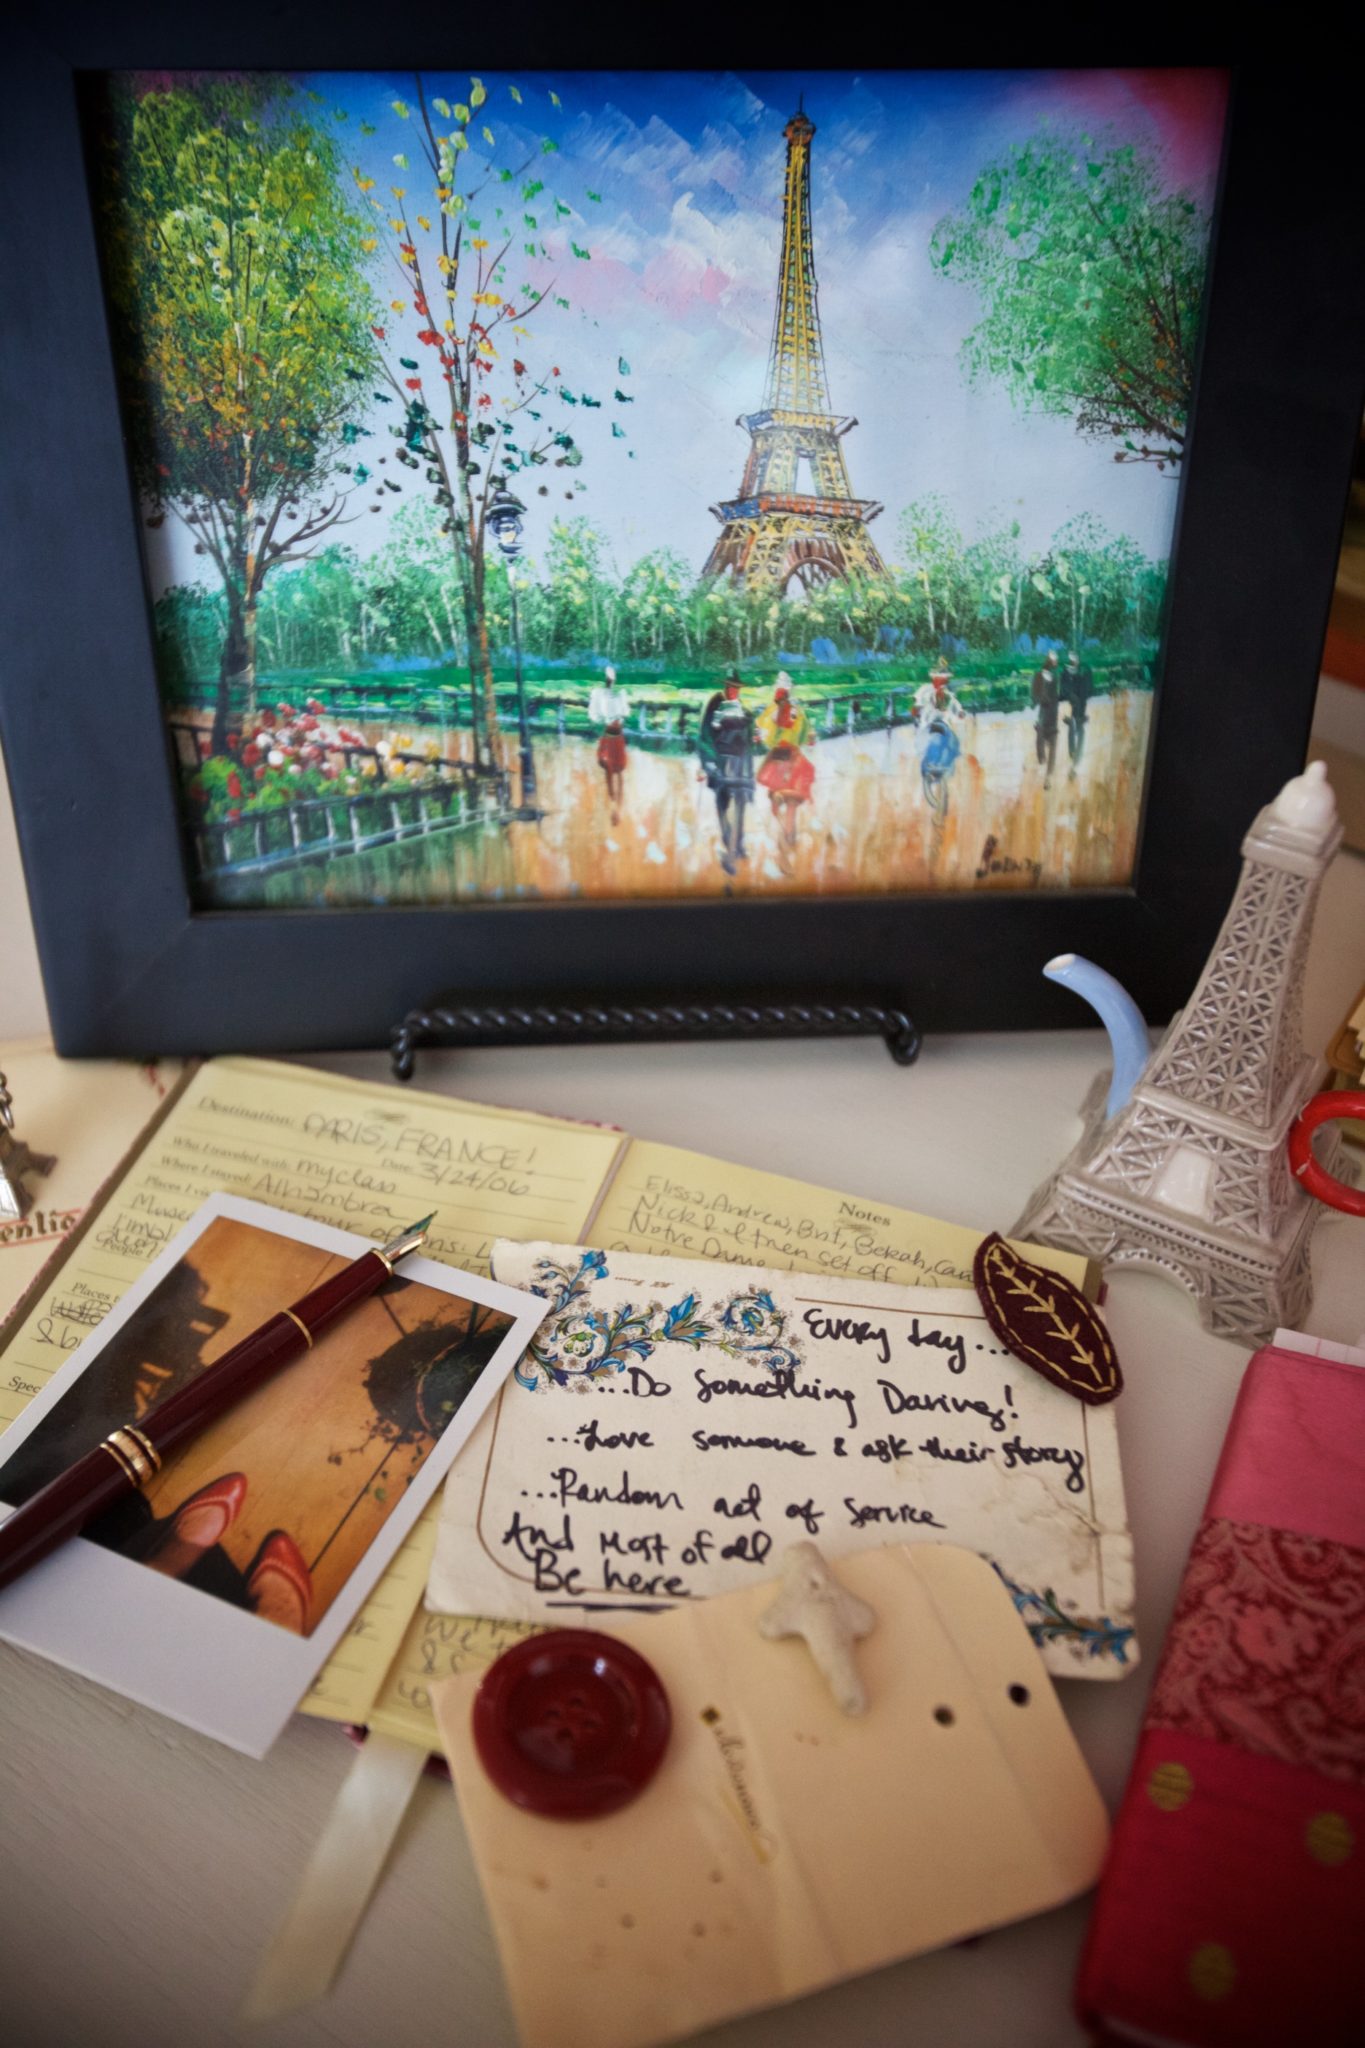 I love this oil painting that Christina purchased while in Paris. So many little treasures in this photo smile emoticon